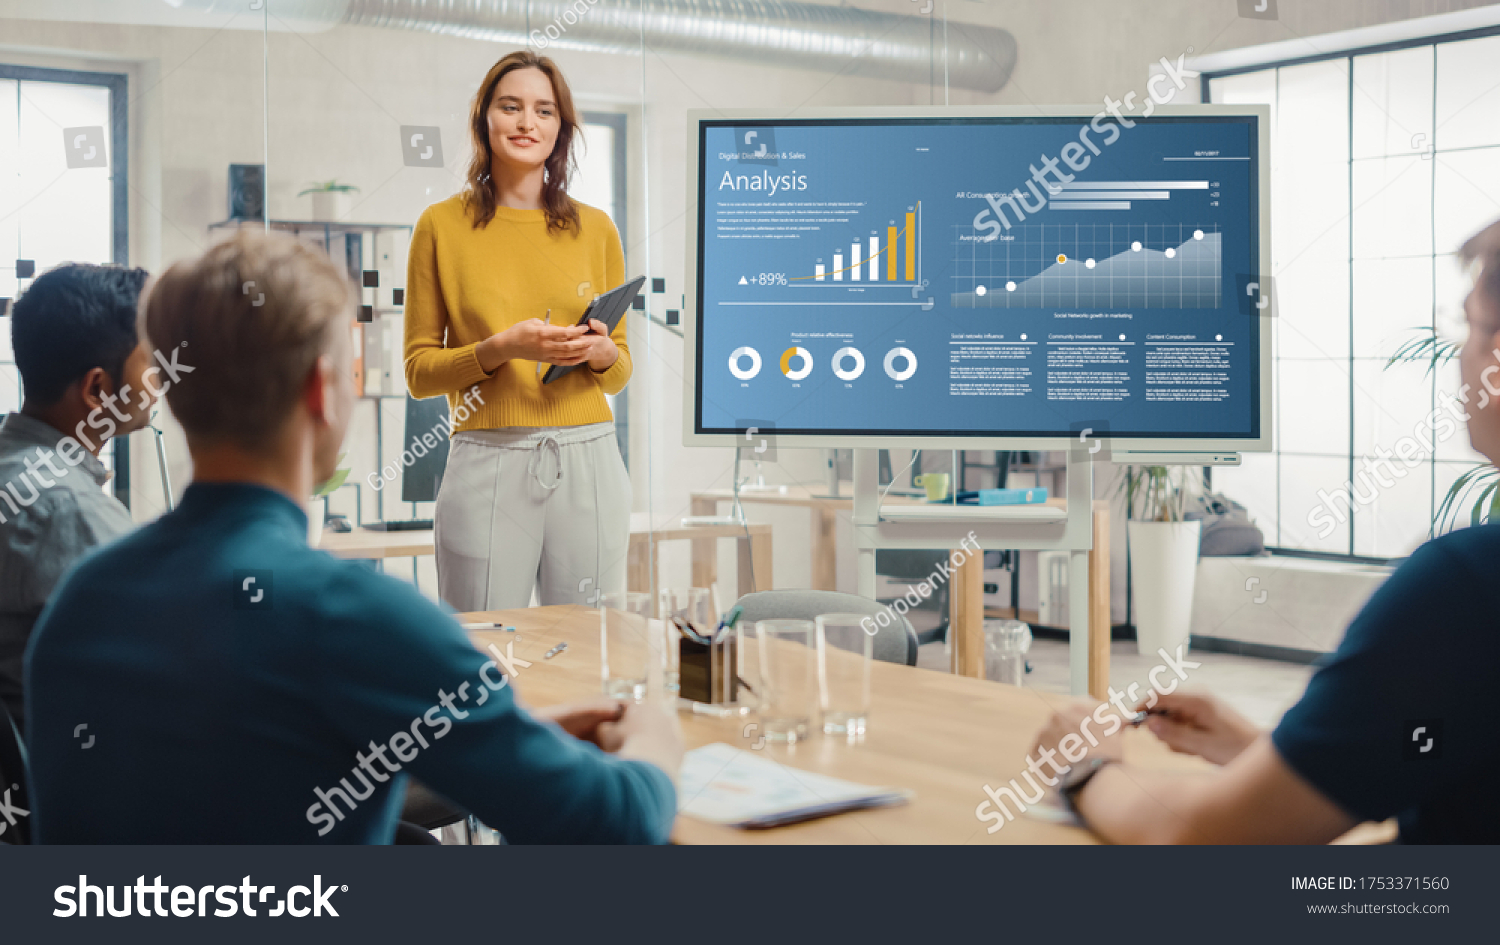 Female Chief Analyst Holds Meeting Presentation for a Team of Economists. She Shows Digital Interactive Whiteboard with Growth Analysis, Charts, Statistics and Data. People Work in Creative Office. #1753371560